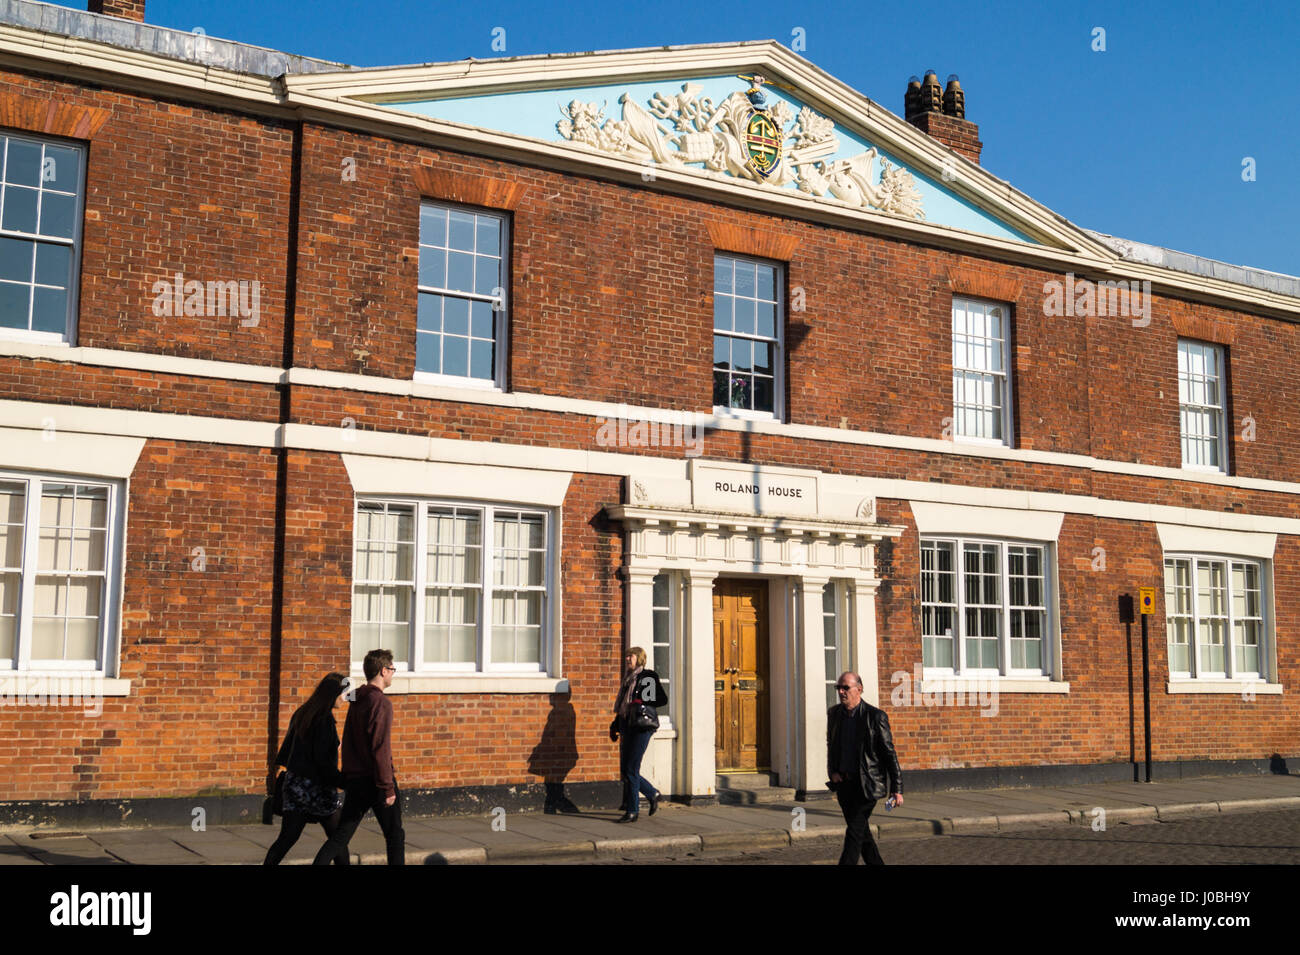 Neo-Classical Ferres Hospital almshouses by John Earle, 1922, now offices, Kingston-upon-Hull, Yorkshire, England Stock Photo